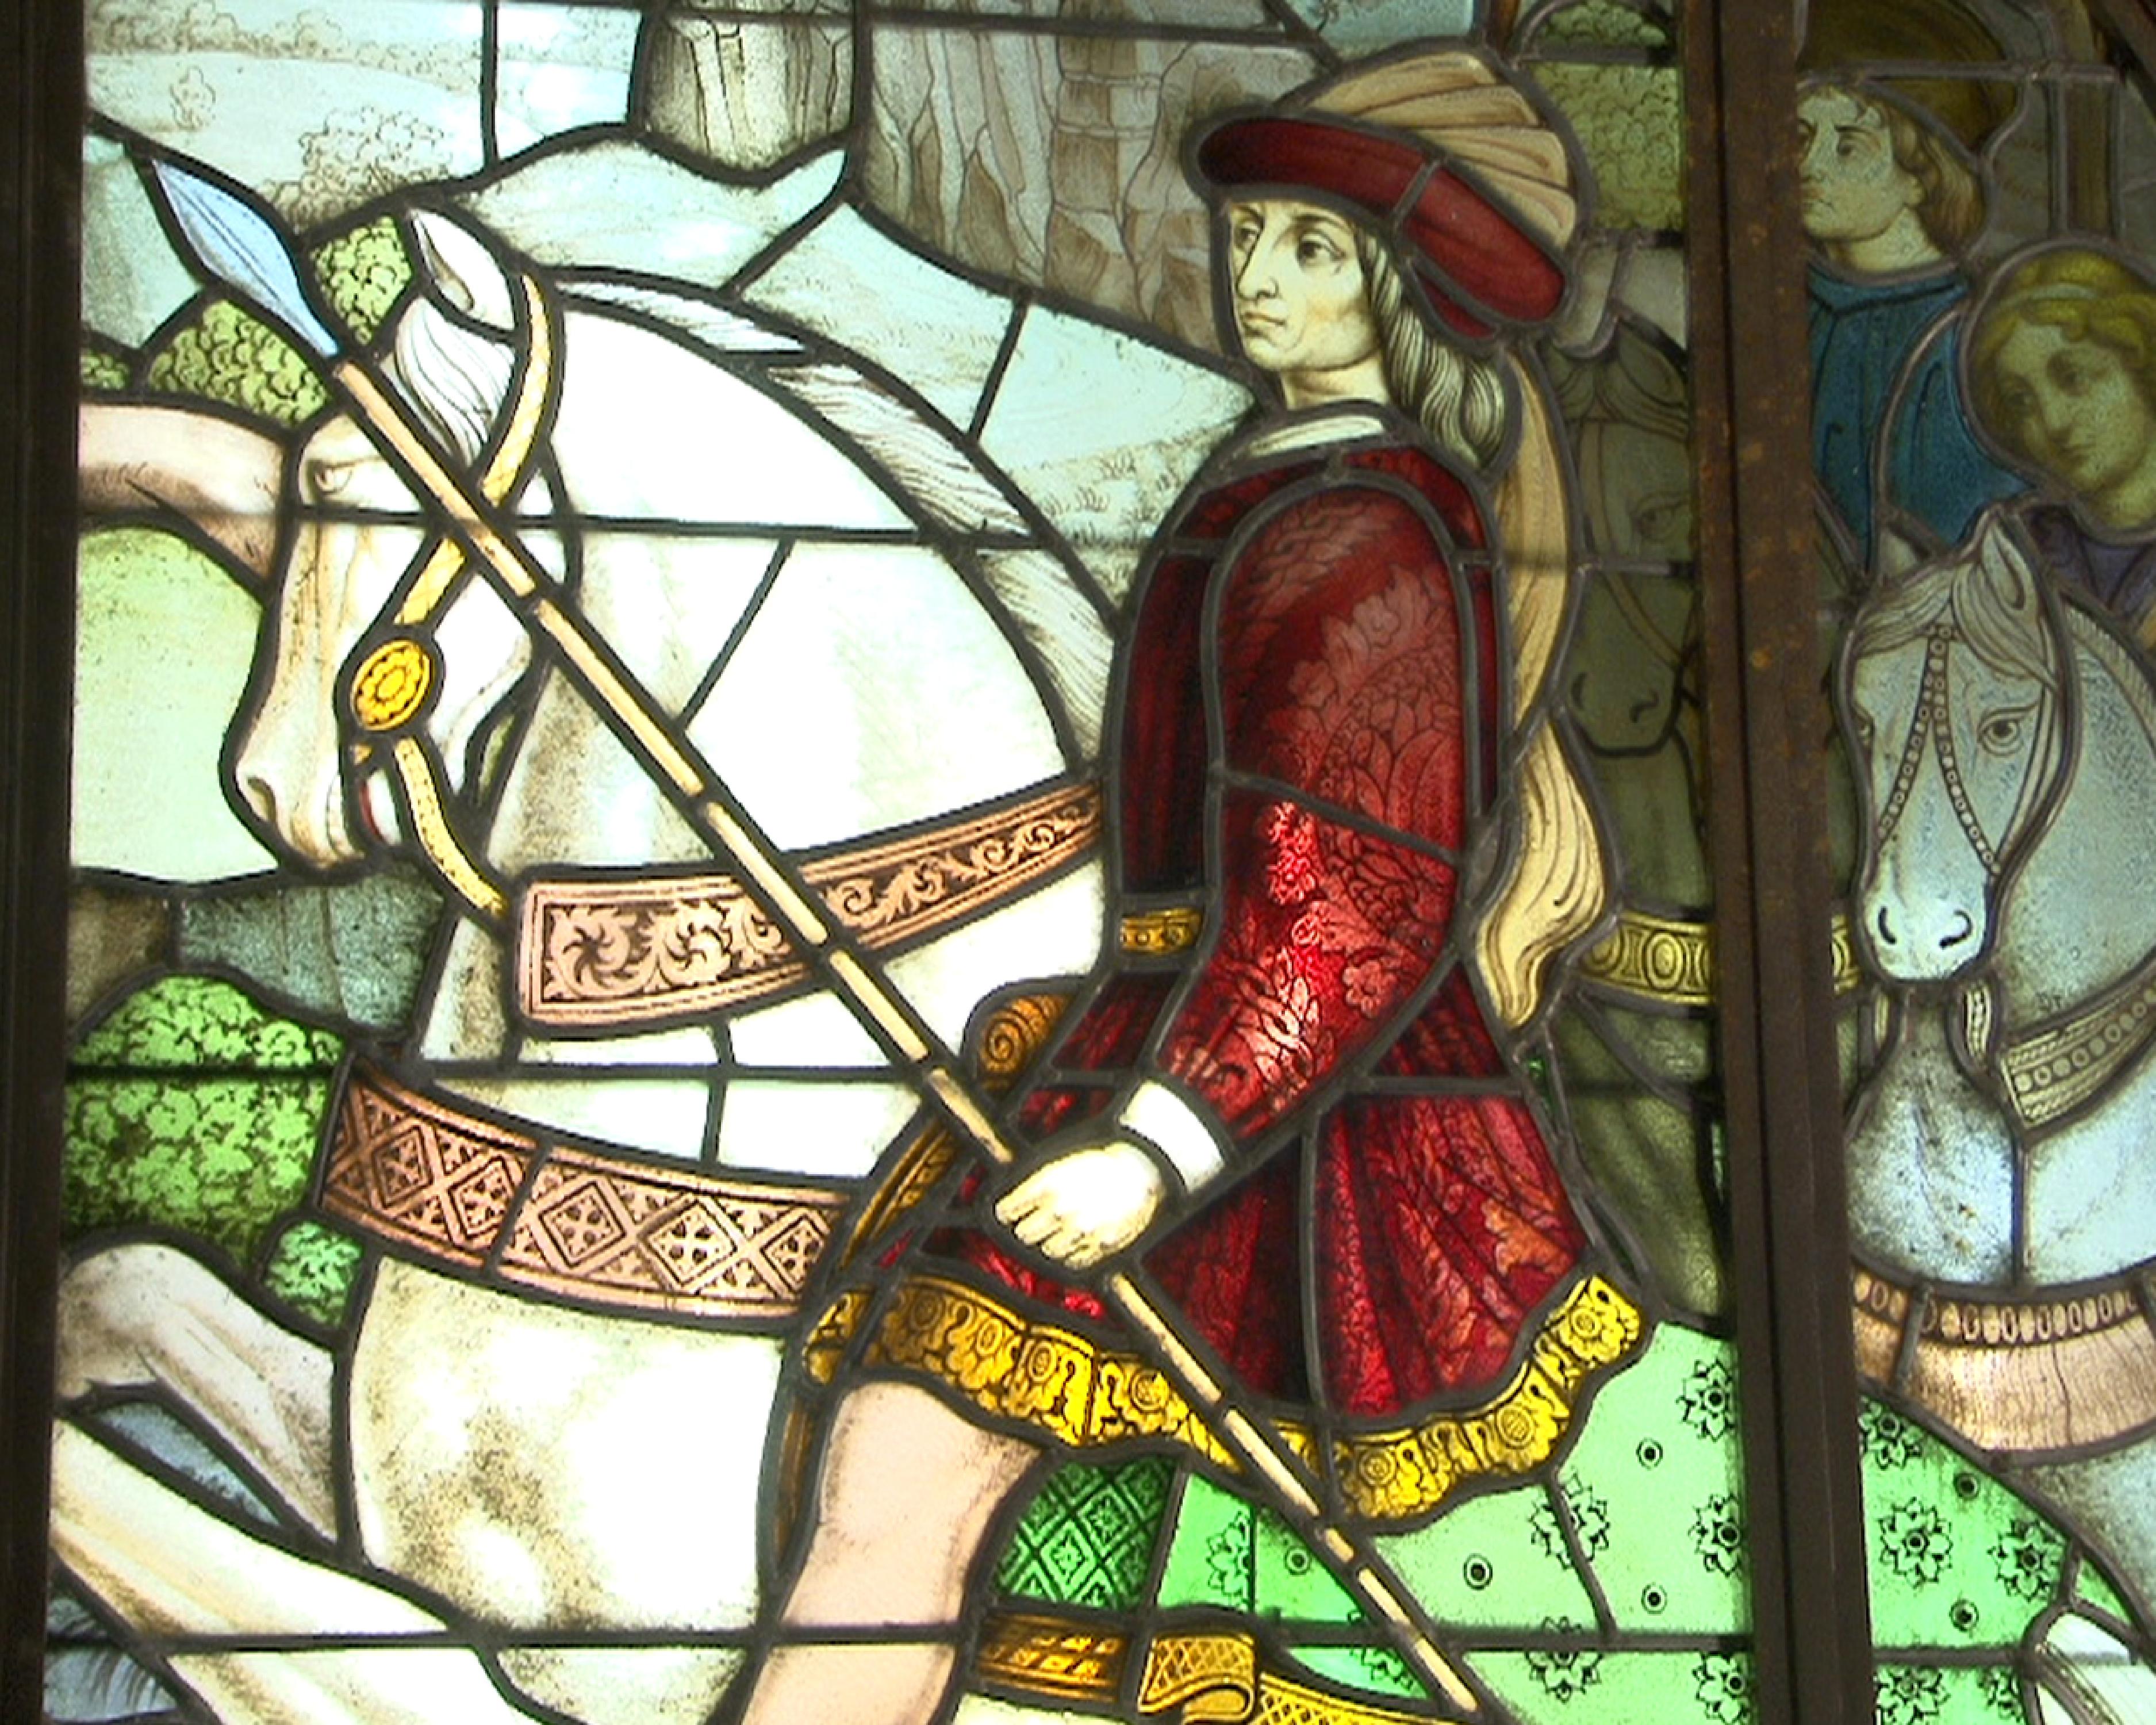 This large Neo-Gothic style stained glass window represents a great hunting scene with two men on their horses, hunting deers. Both men, wealthy squires, wear medieval costumes, as embroidered tunic, plumed hat and long spurs. One men is trying to